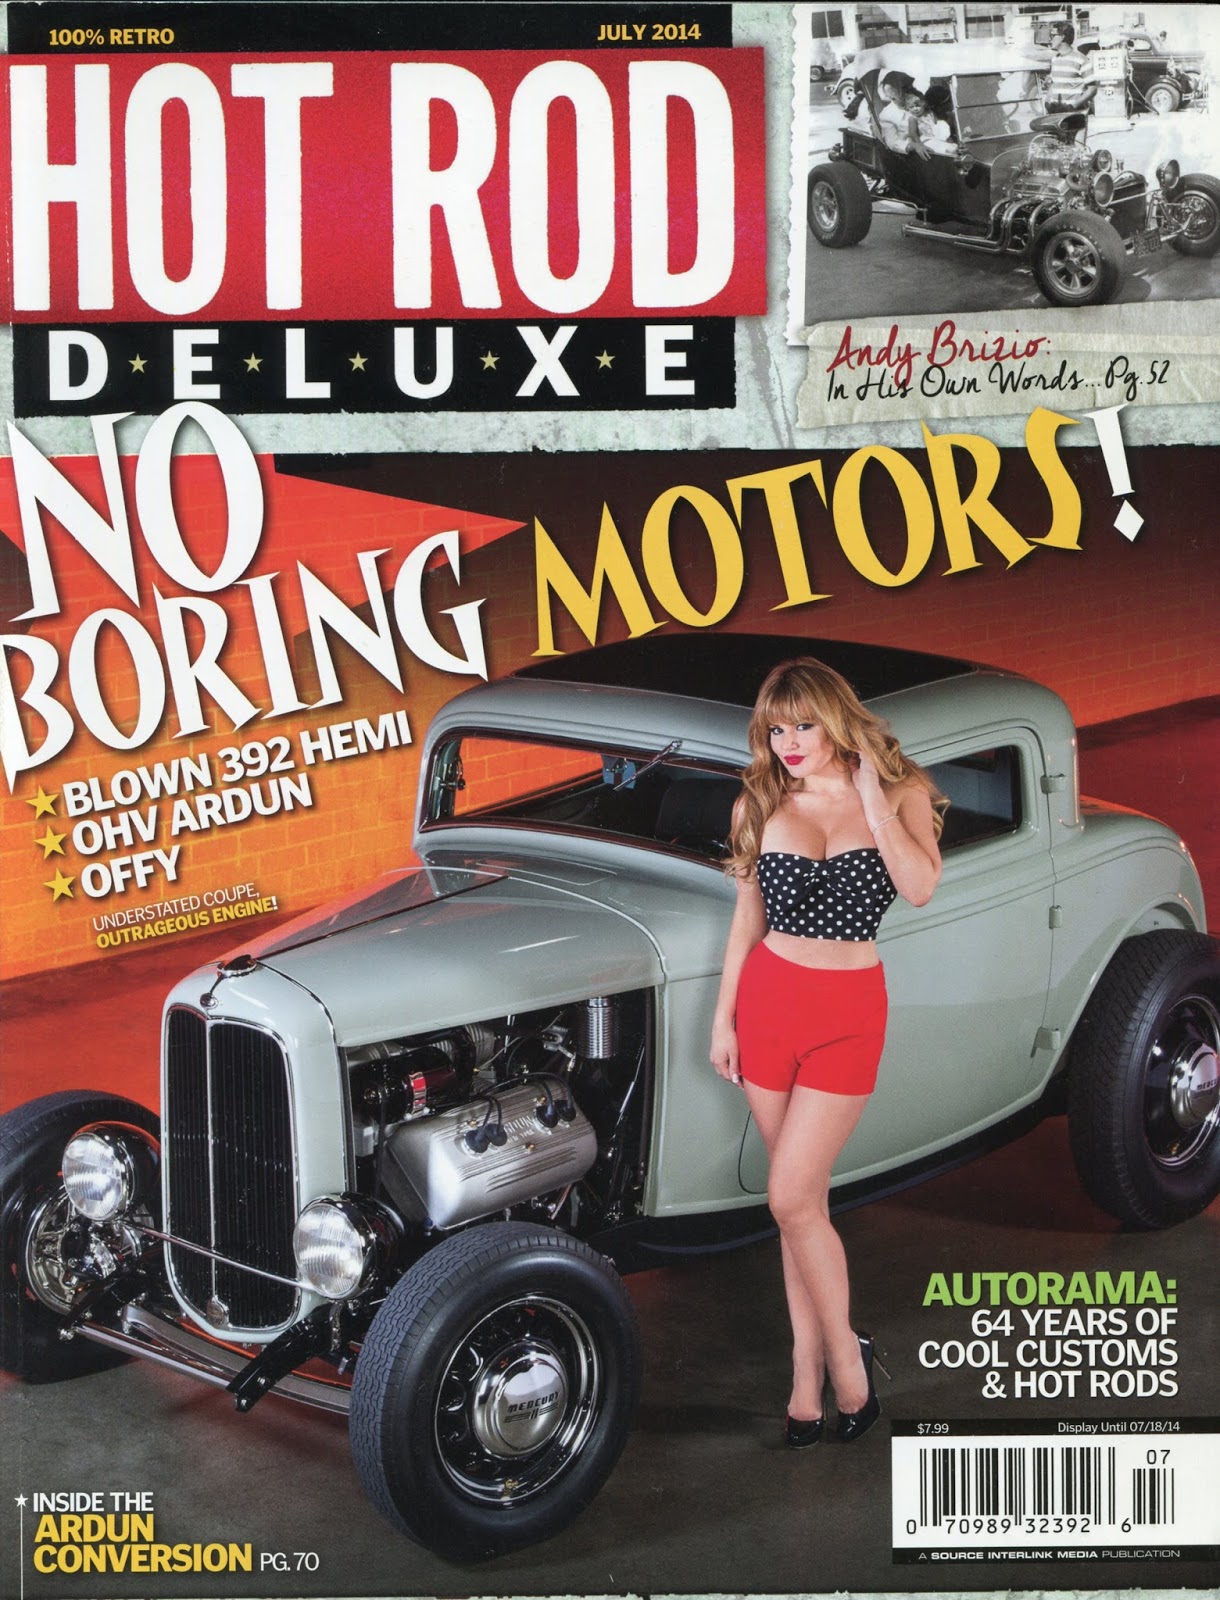 Hot Rod Deluxe and Rod & Custom both dropped models from their pages la...